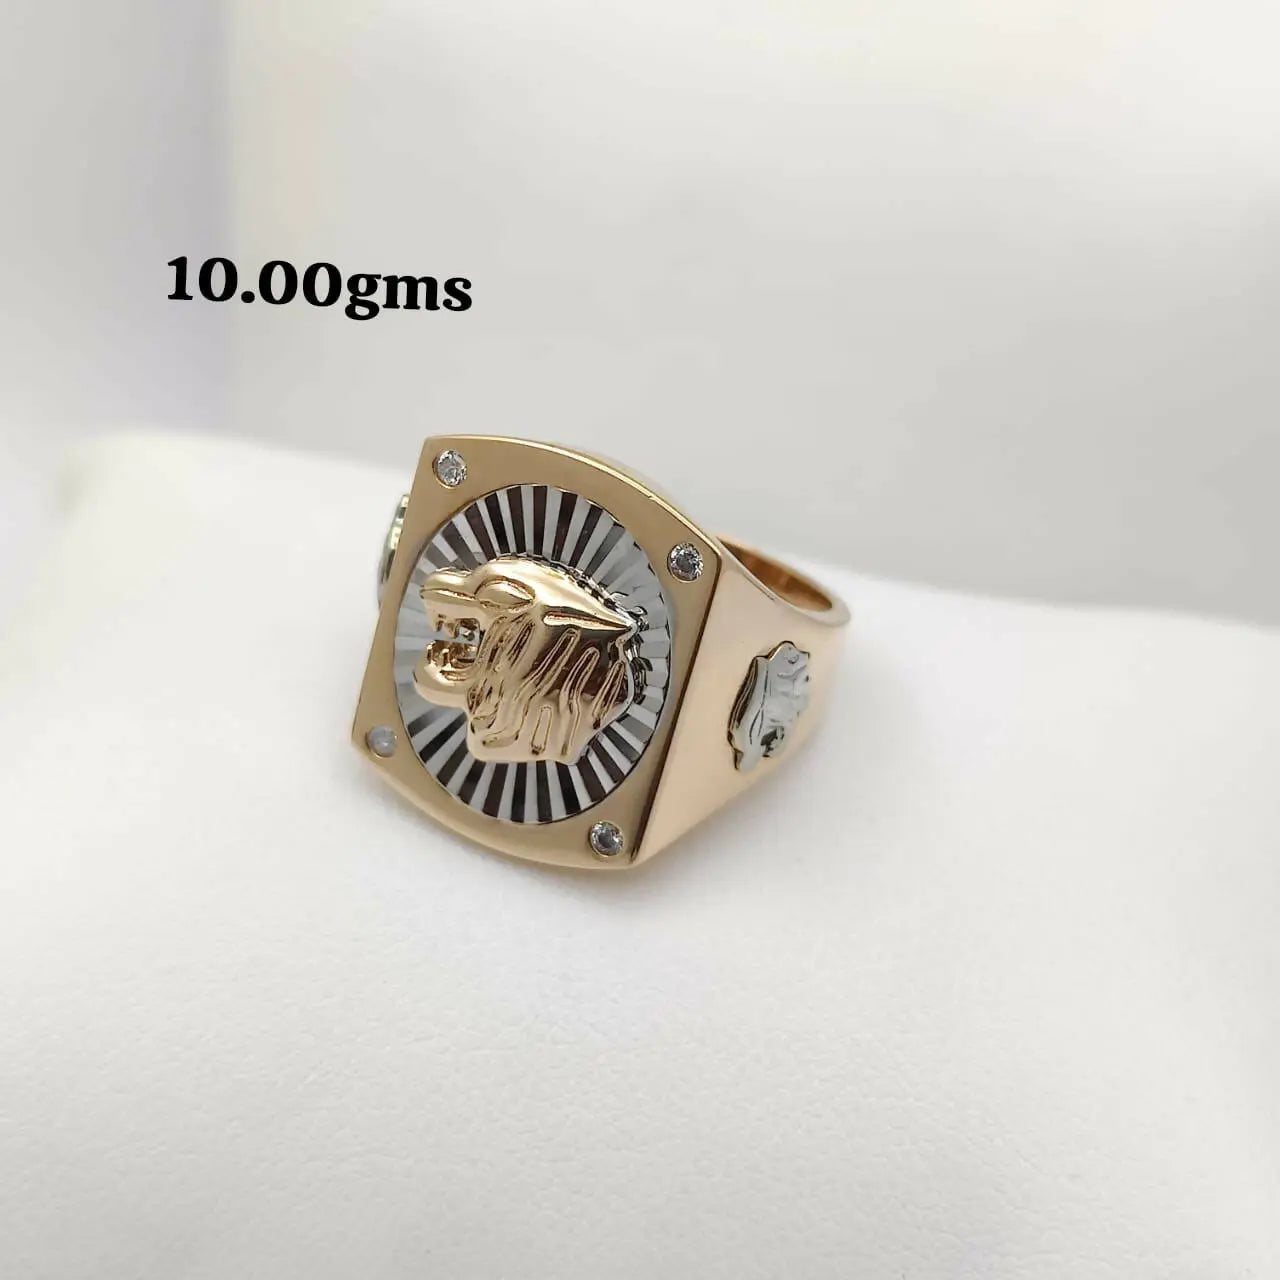 Solid 925 Sterling Silver Men's with Vintage Antiqued Replica 50 Lire  Italian Coin Ring Band Size 9|Amazon.com